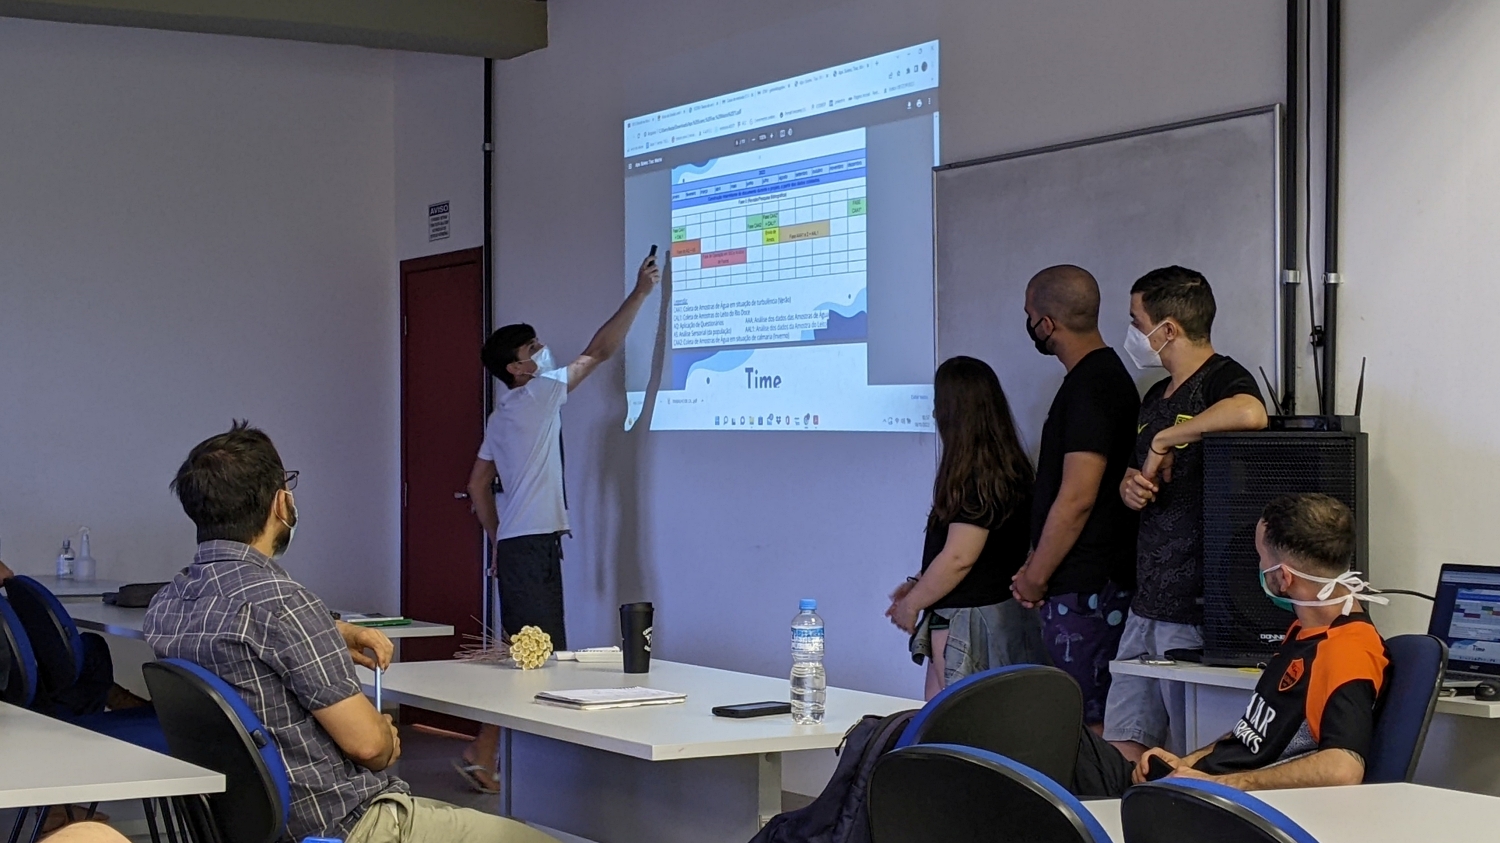 A student in a t-shirt points at a horizontal time table on a projector screen, showing when the various phases of a project will be completed.  His teammates are standing on the other side and looking on.  A professor is watching them.